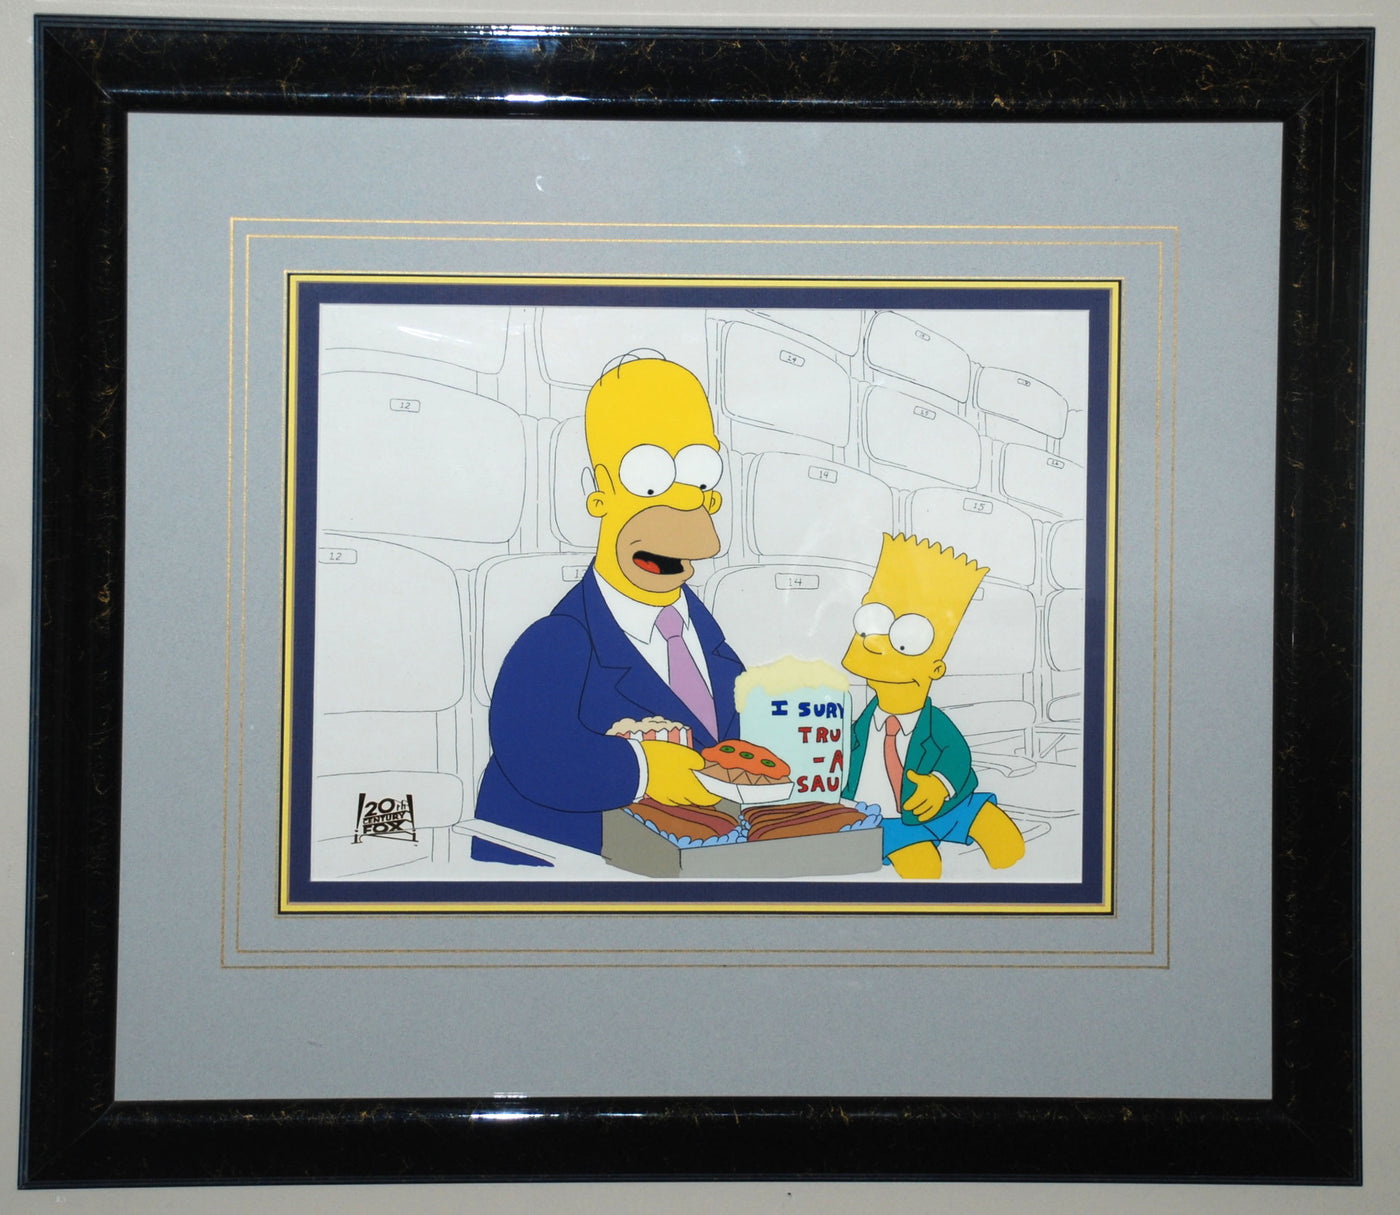 Original Simpsons Production Cel from the Simpsons featuring Homer and Bart